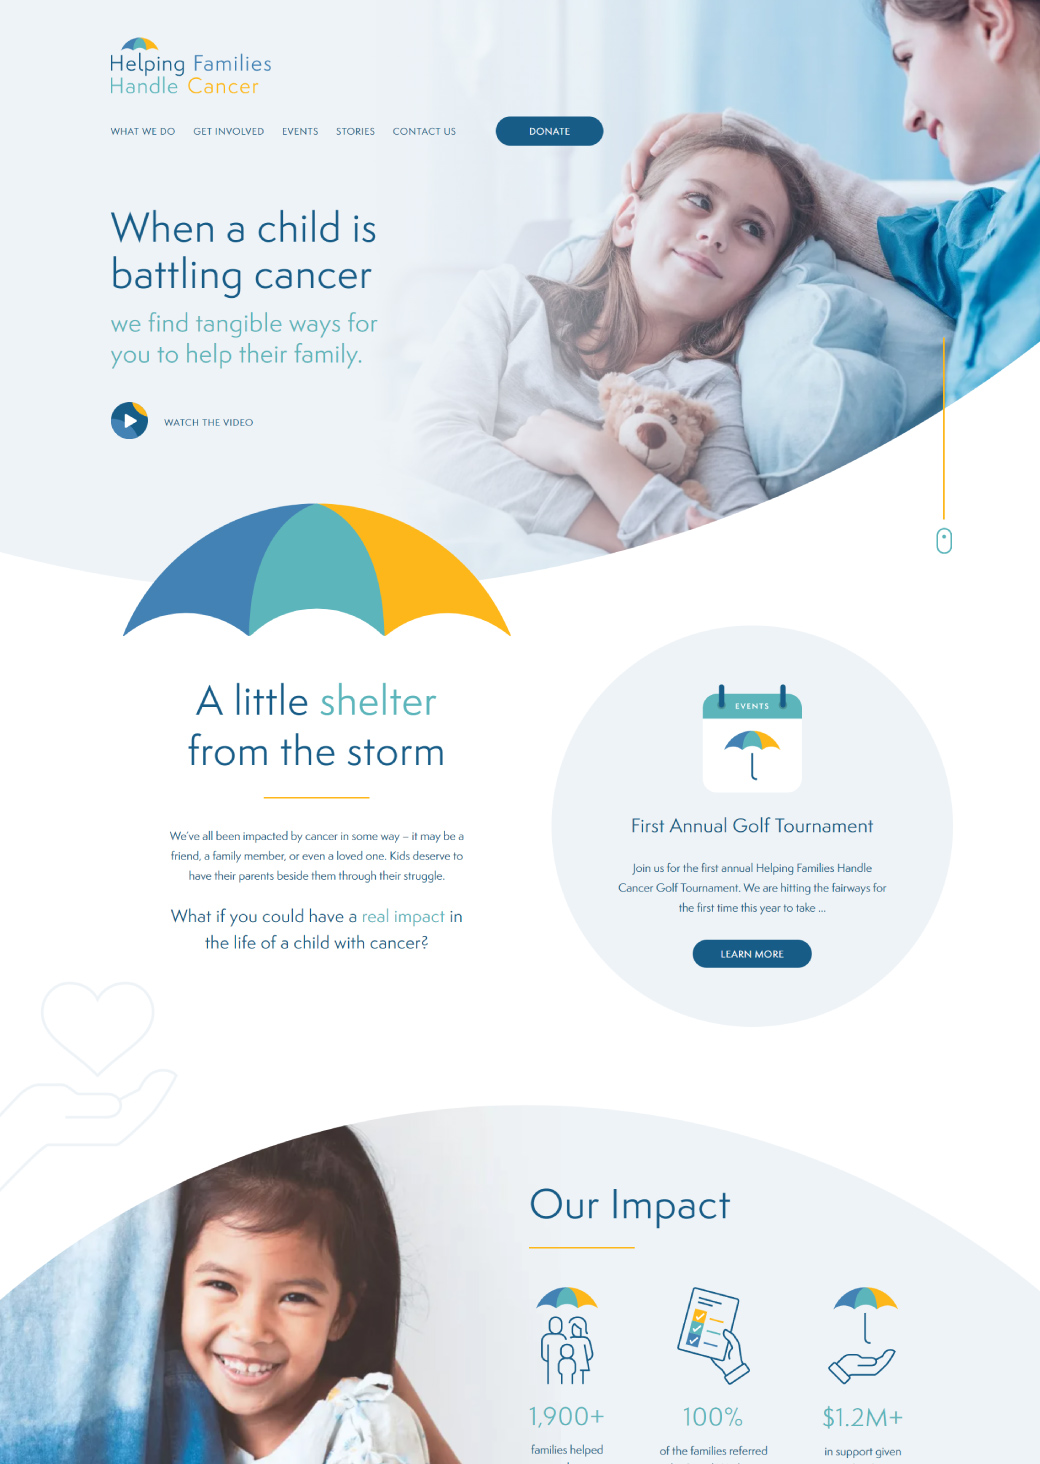 Helping Families Handle Cancer - Desktop view of the new website True Market developed